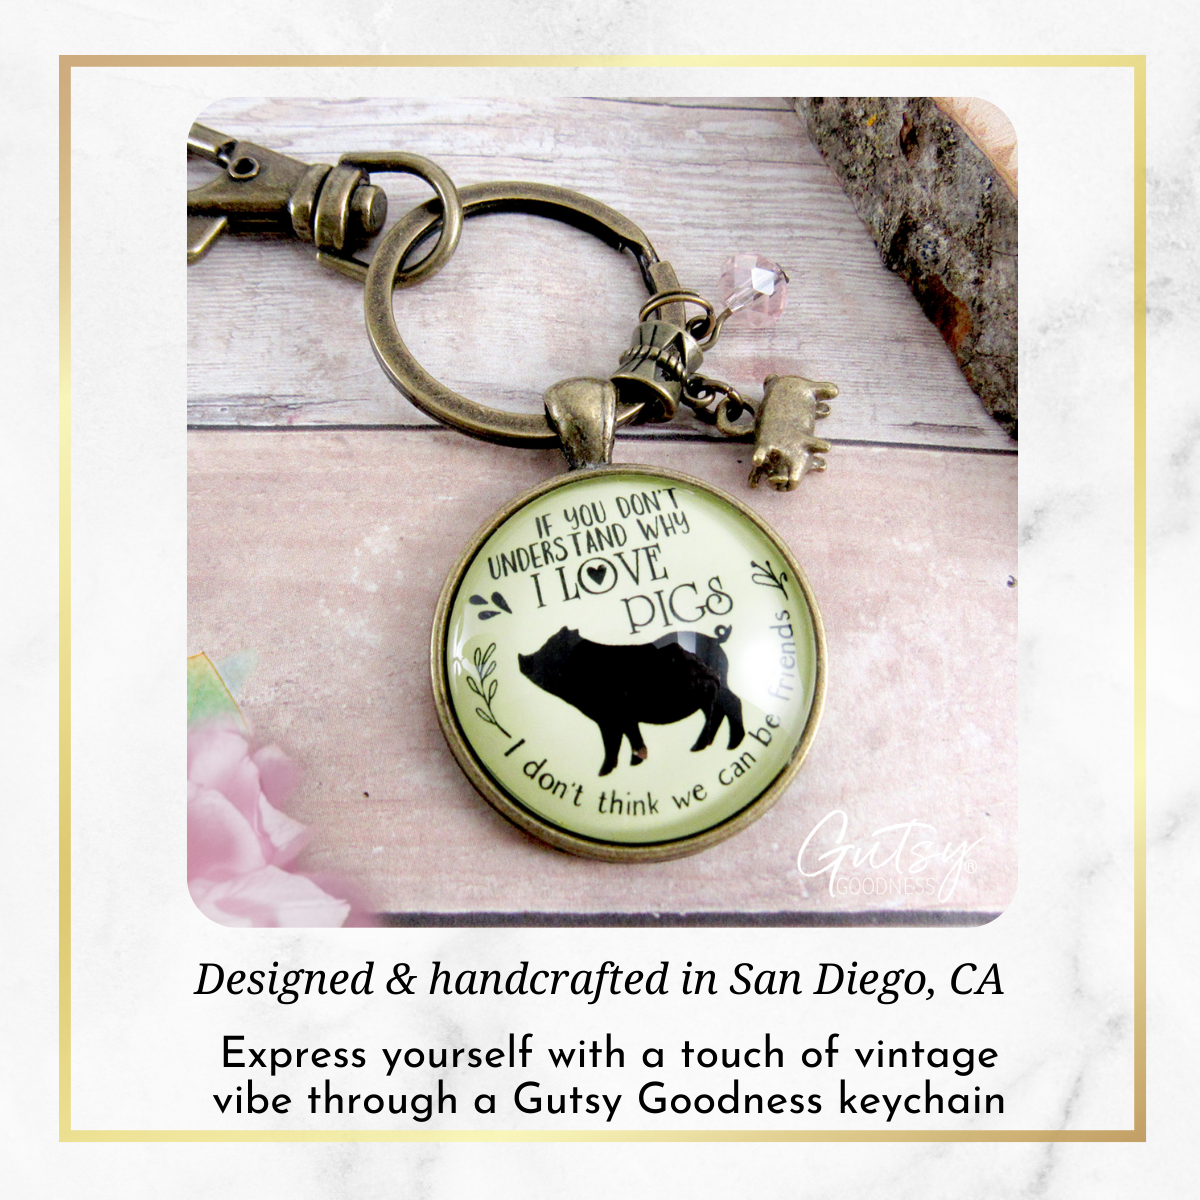 Pig Friendship Keychain Country Girl Pig Lovers Inspired Jewelry - Gutsy Goodness Handmade Jewelry;Pig Friendship Keychain Country Girl Pig Lovers Inspired Jewelry - Gutsy Goodness Handmade Jewelry Gifts